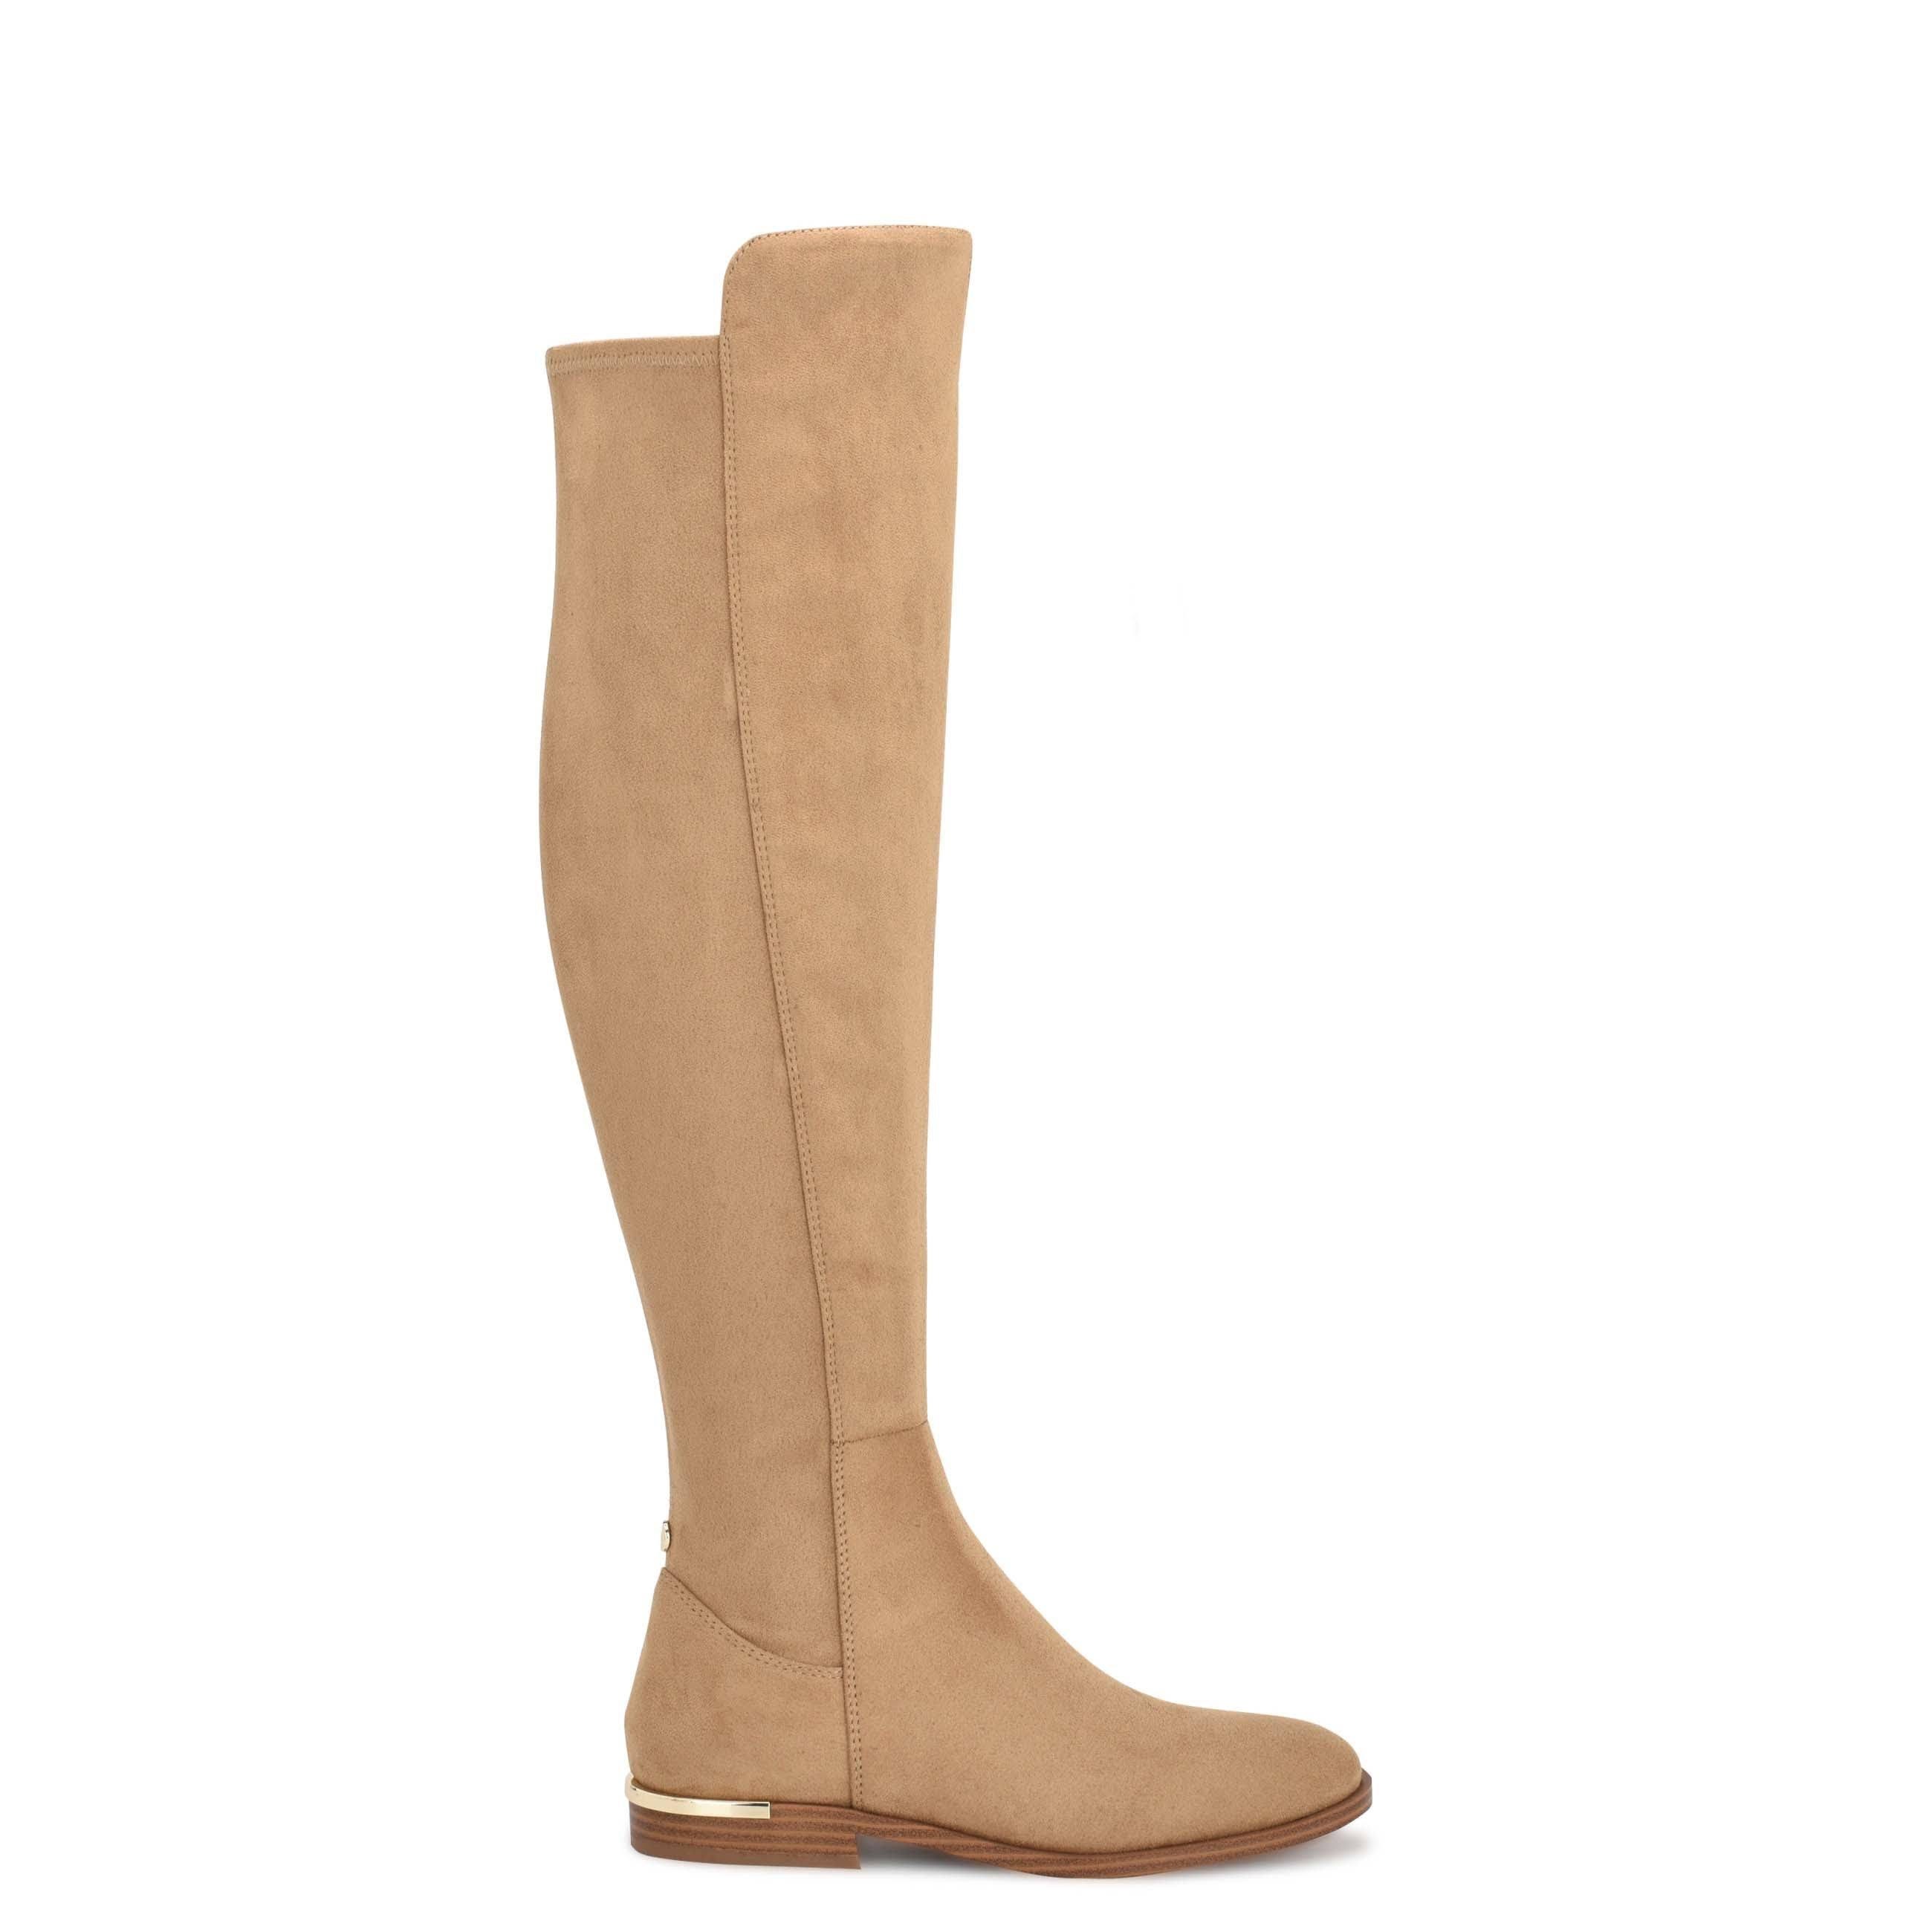 Elevated White Knee-High Boots by Nine West | Image